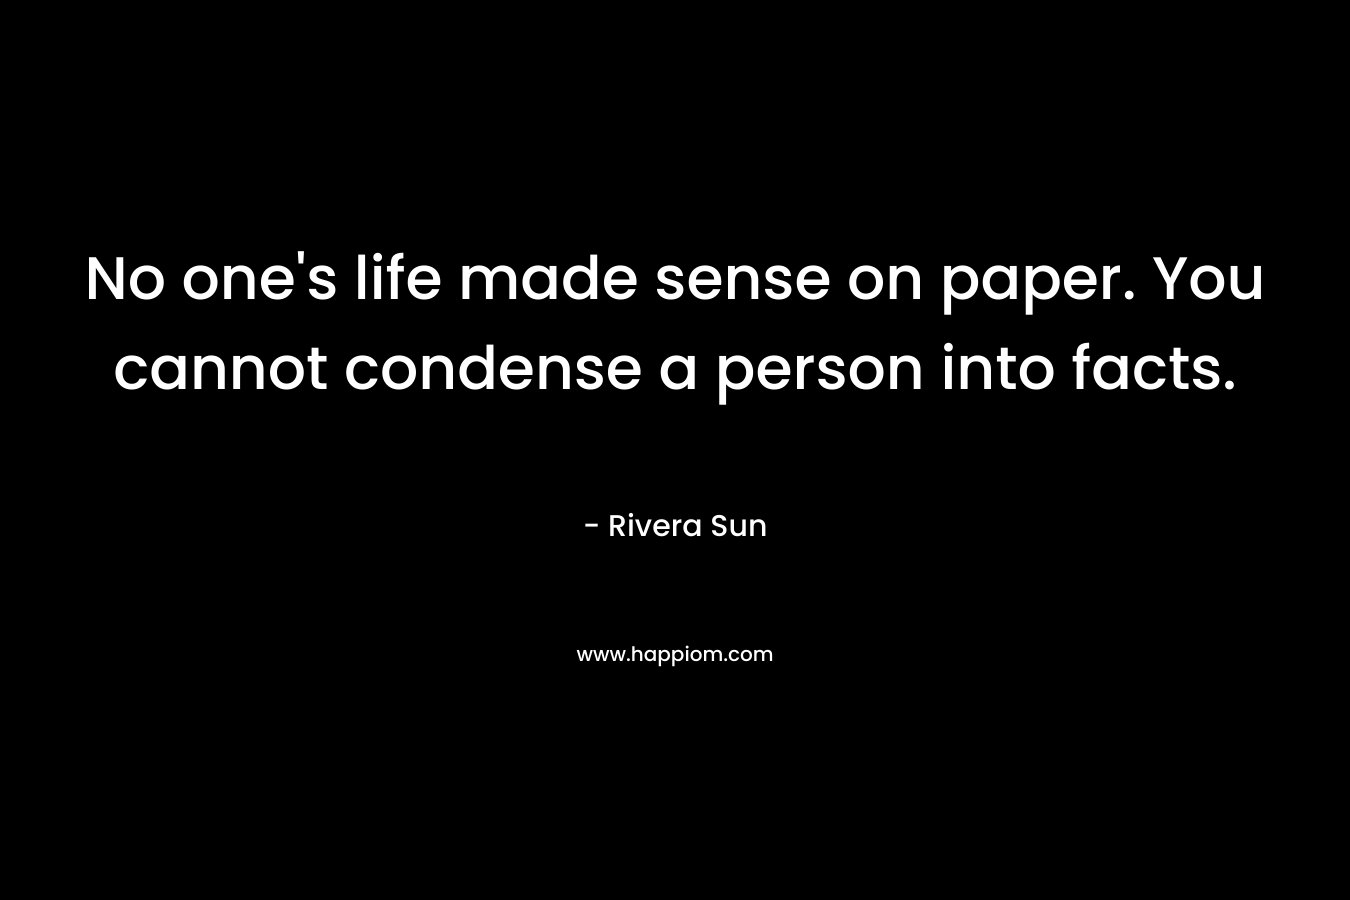 No one’s life made sense on paper. You cannot condense a person into facts. – Rivera Sun